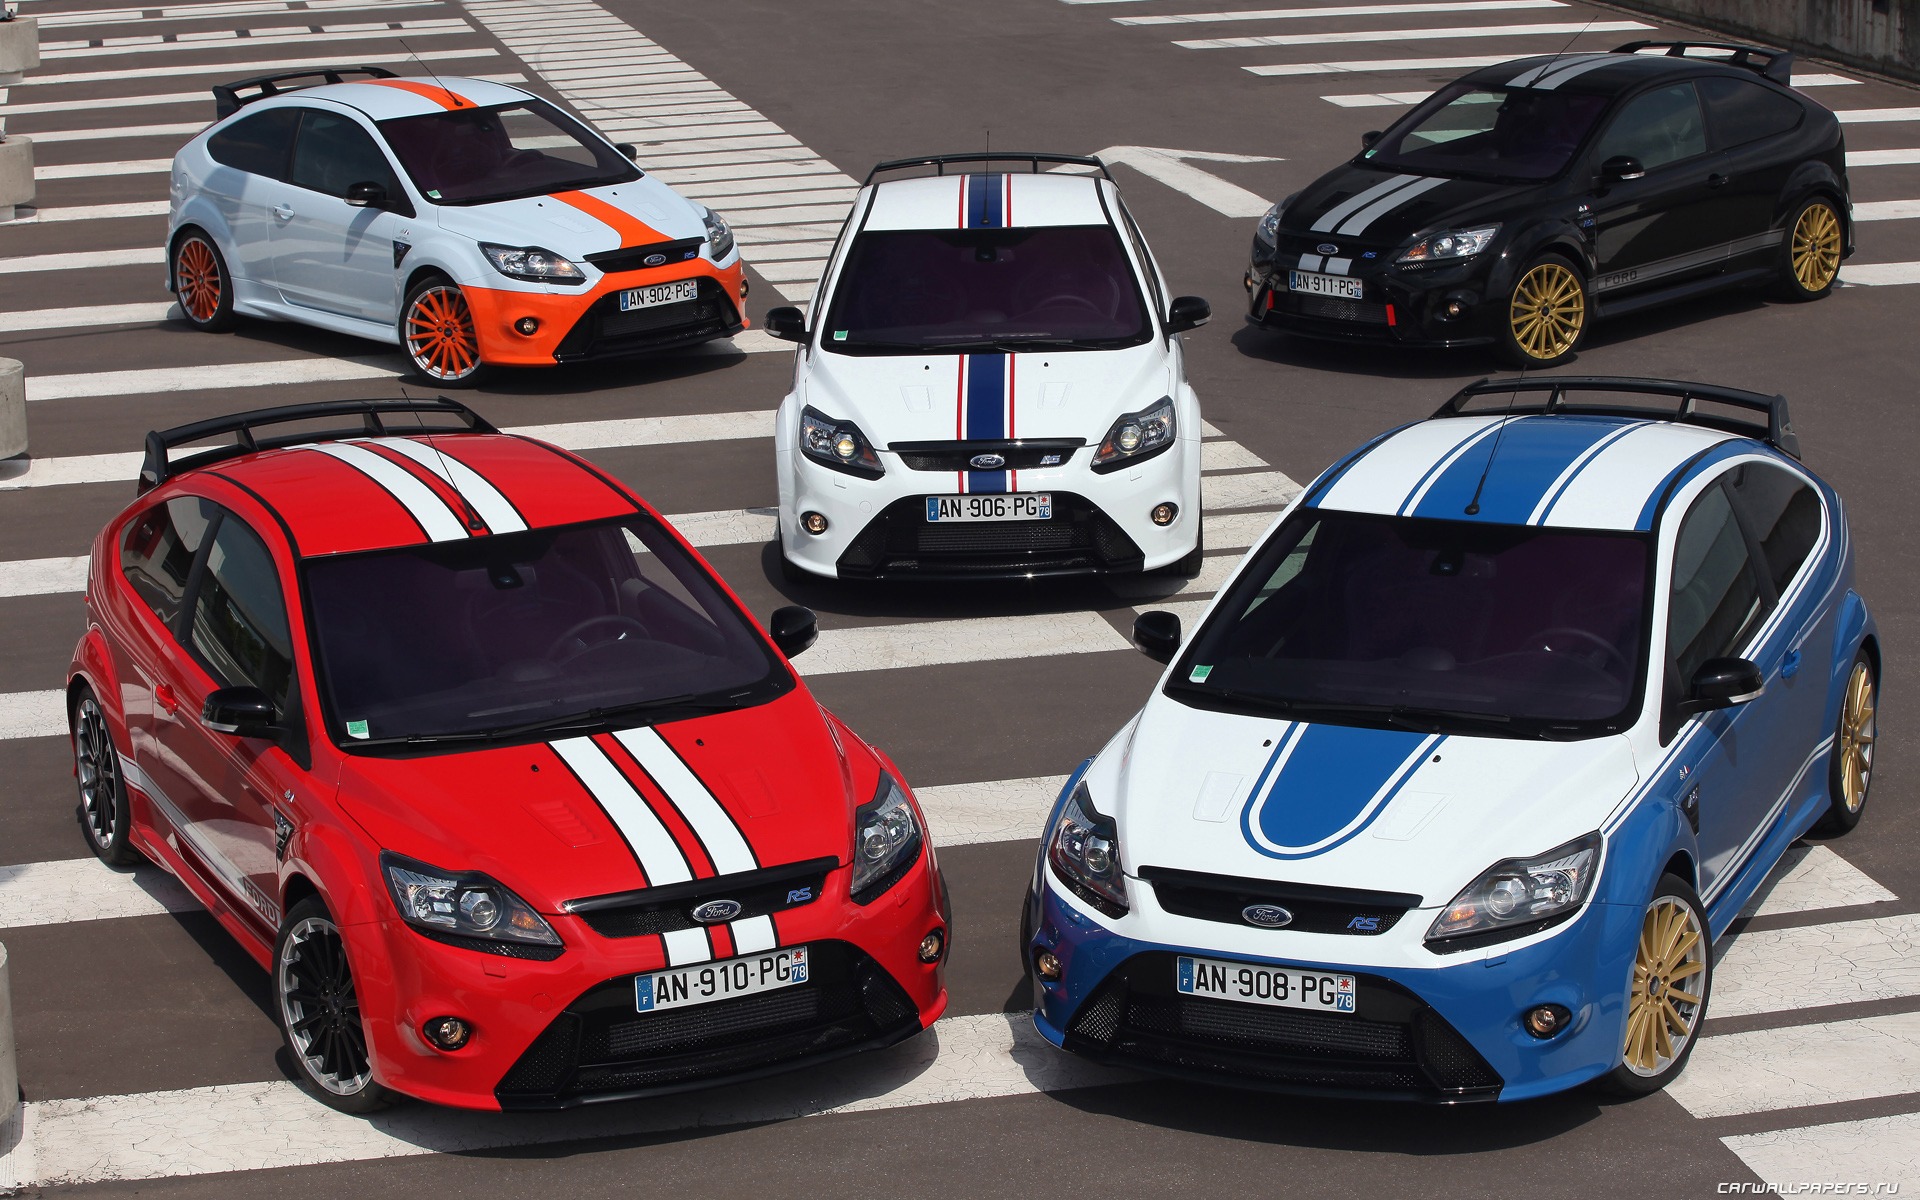 Ford Focus RS Le Mans Classic - 2010 福特11 - 1920x1200